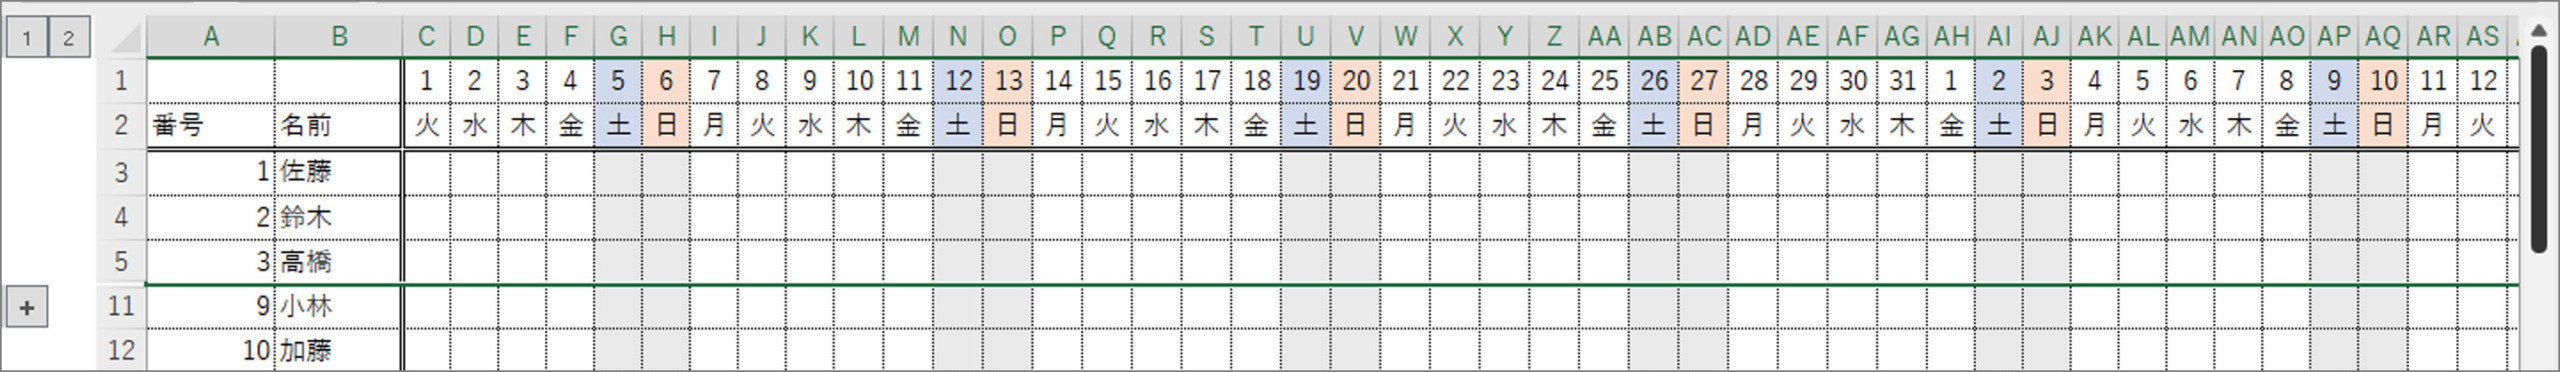 grouping excel rows columns 05 scaled